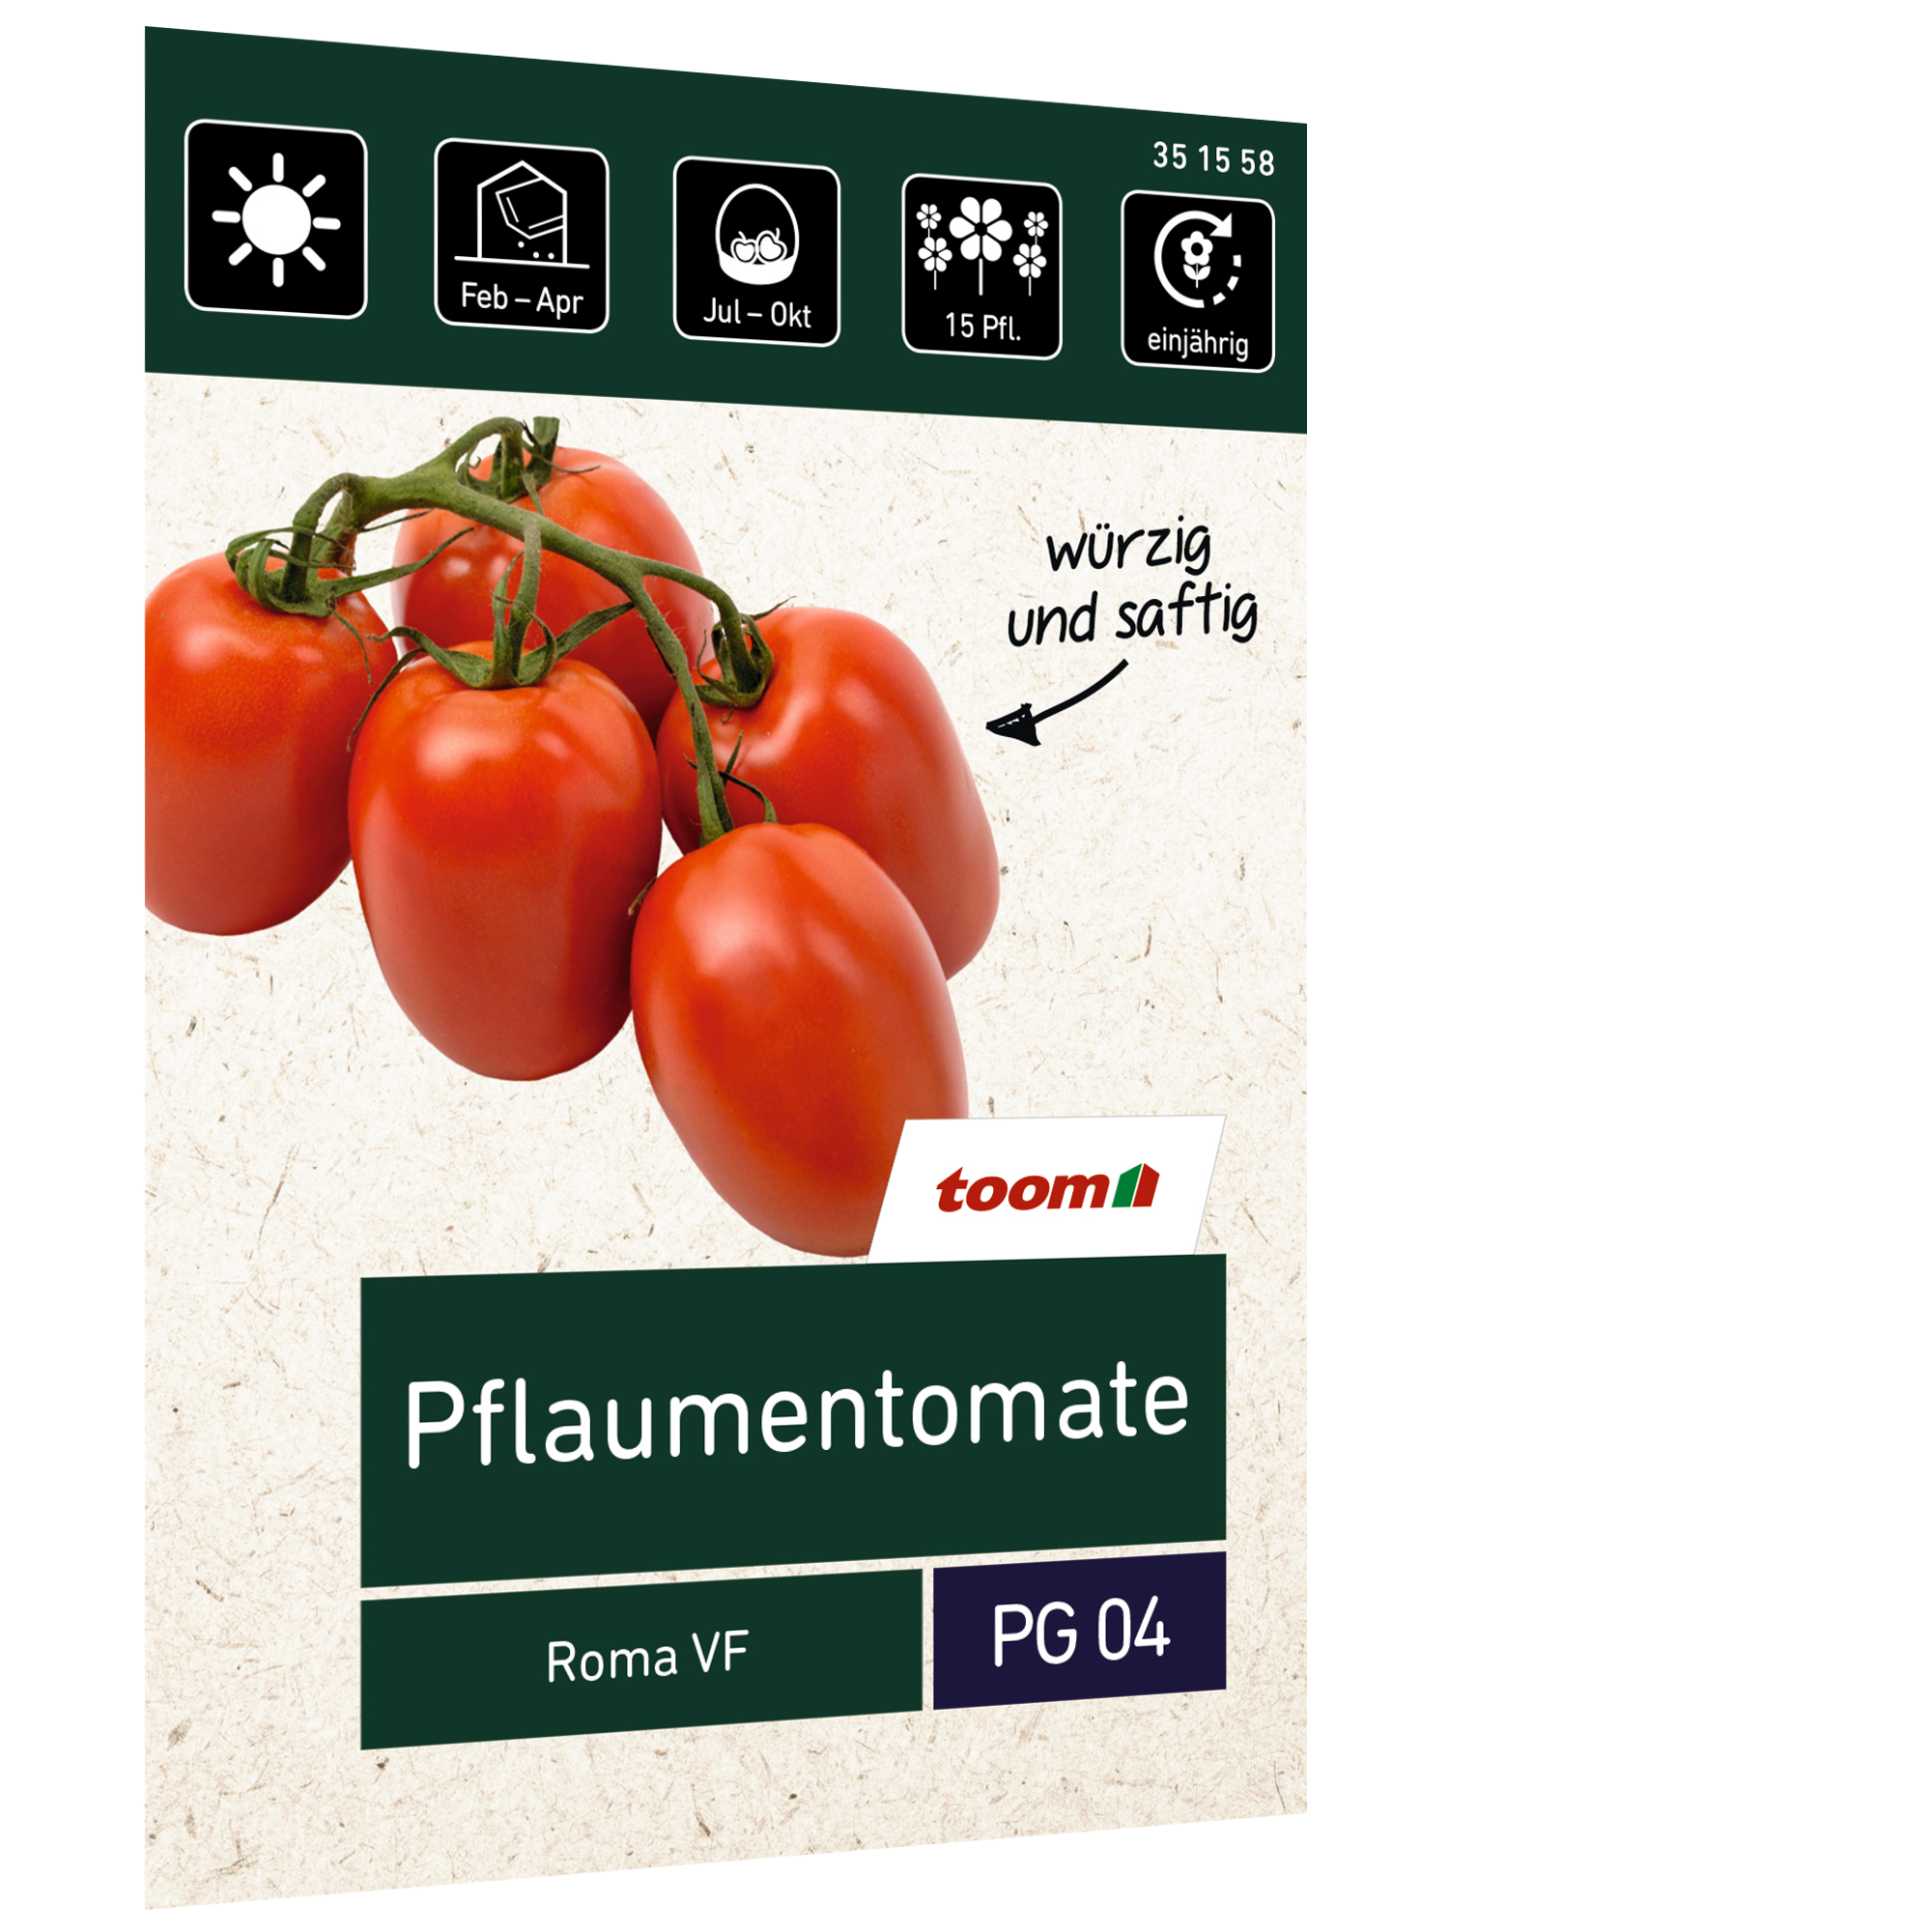 Pflaumentomate 'Roma VF' + product picture